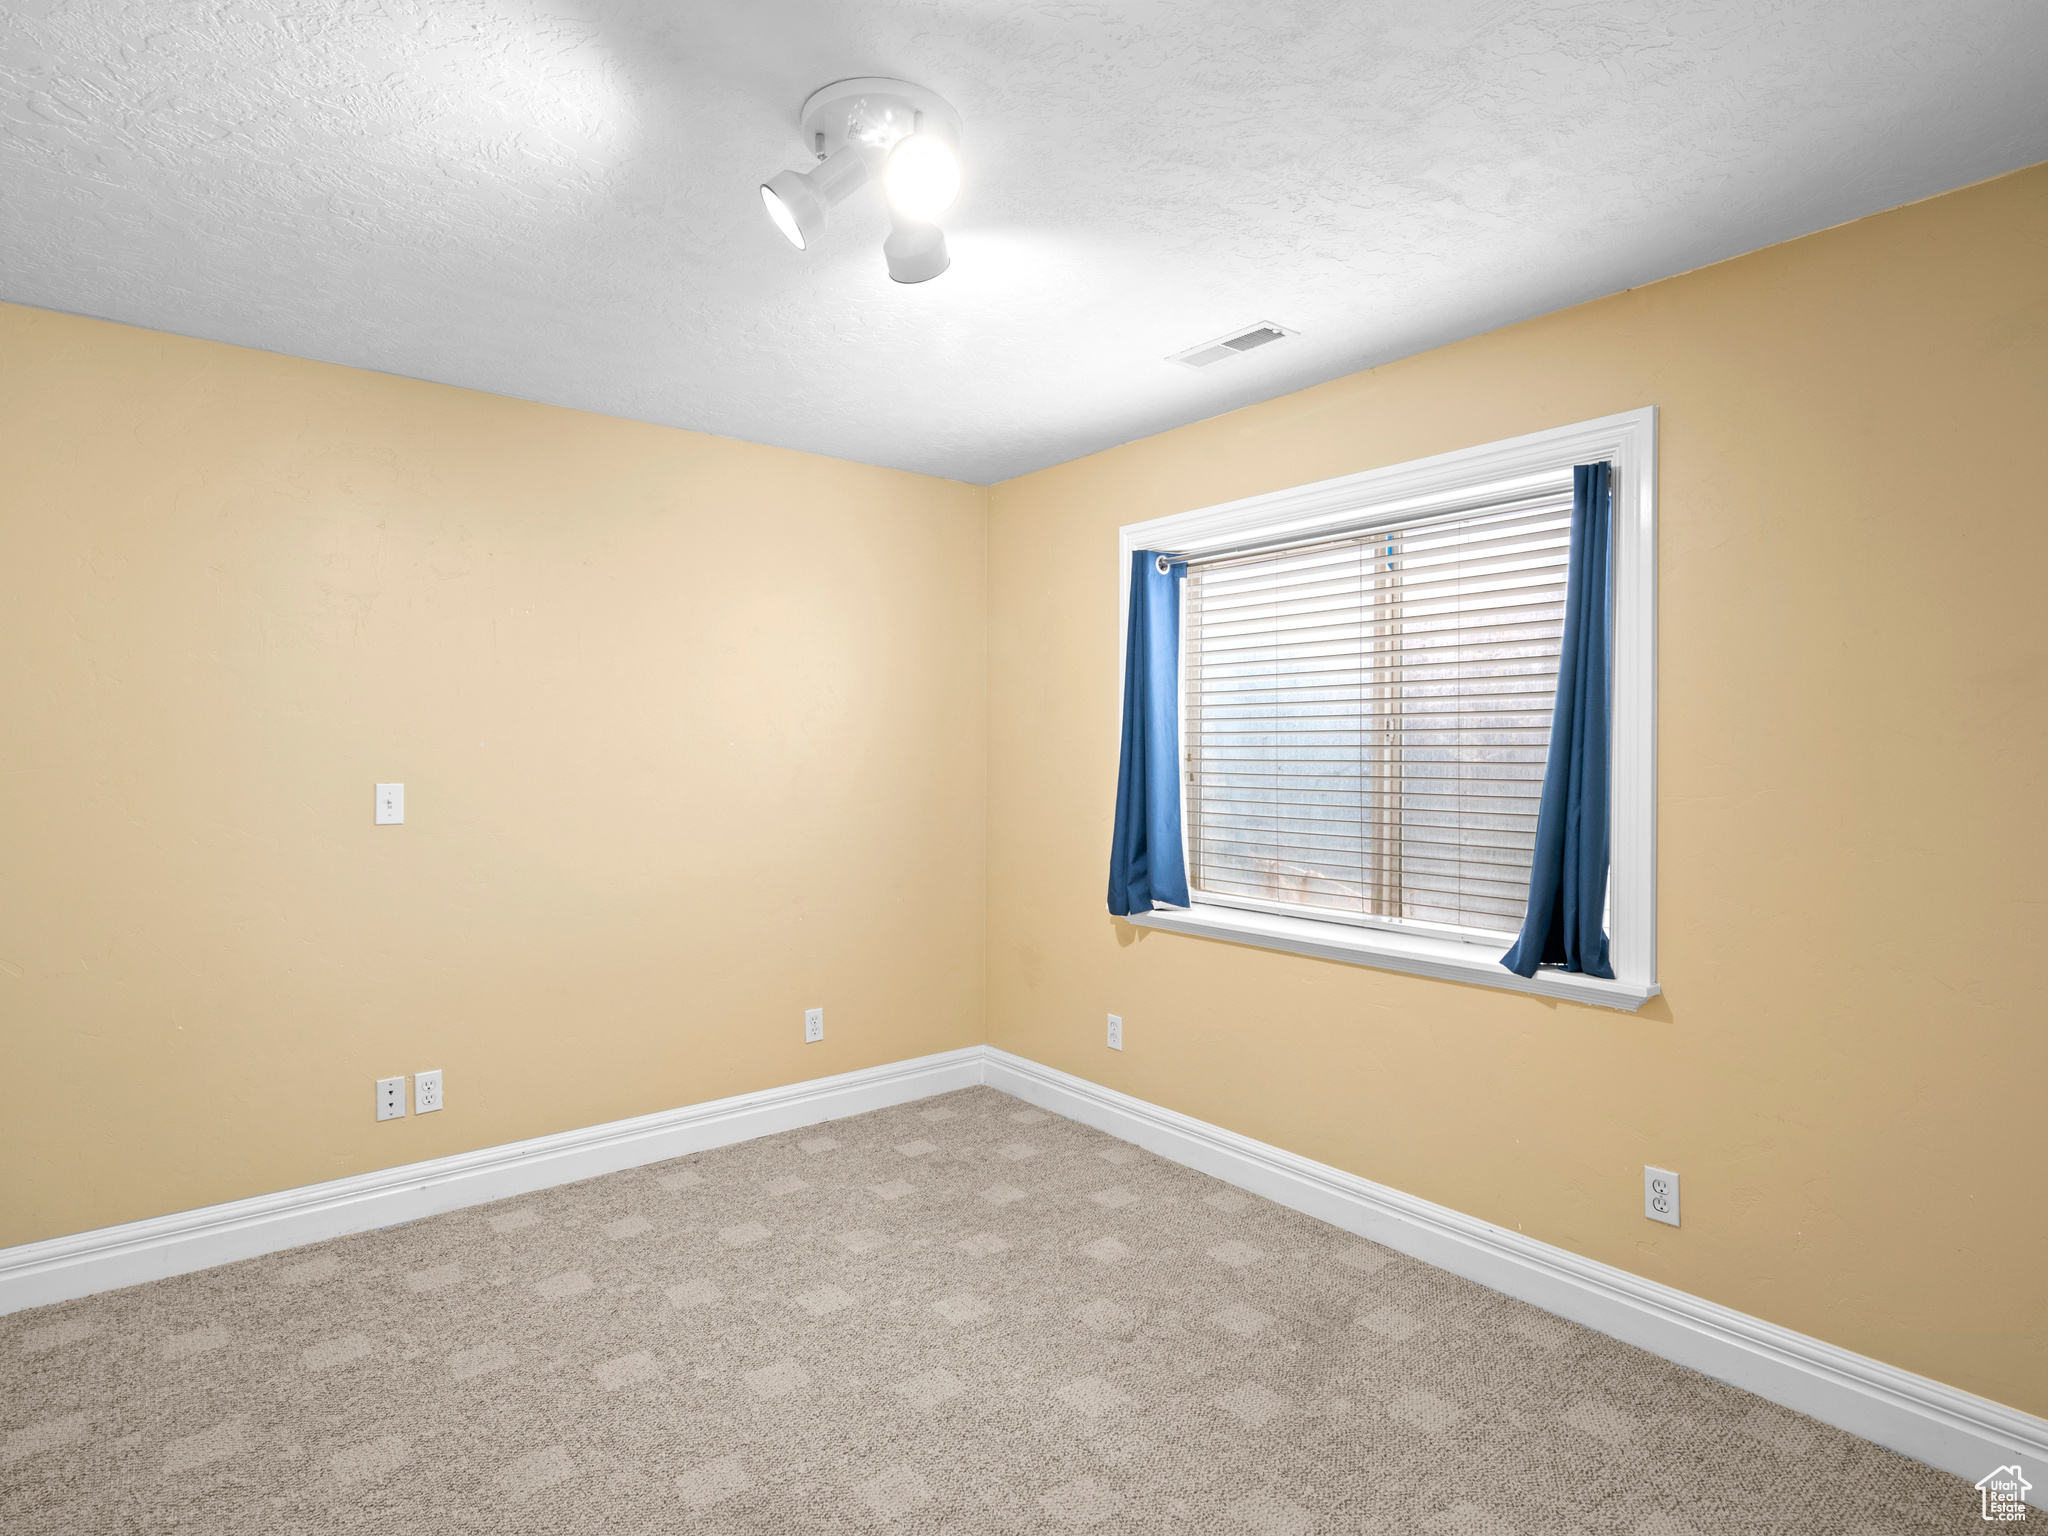 Unfurnished room featuring light colored carpet and a textured ceiling